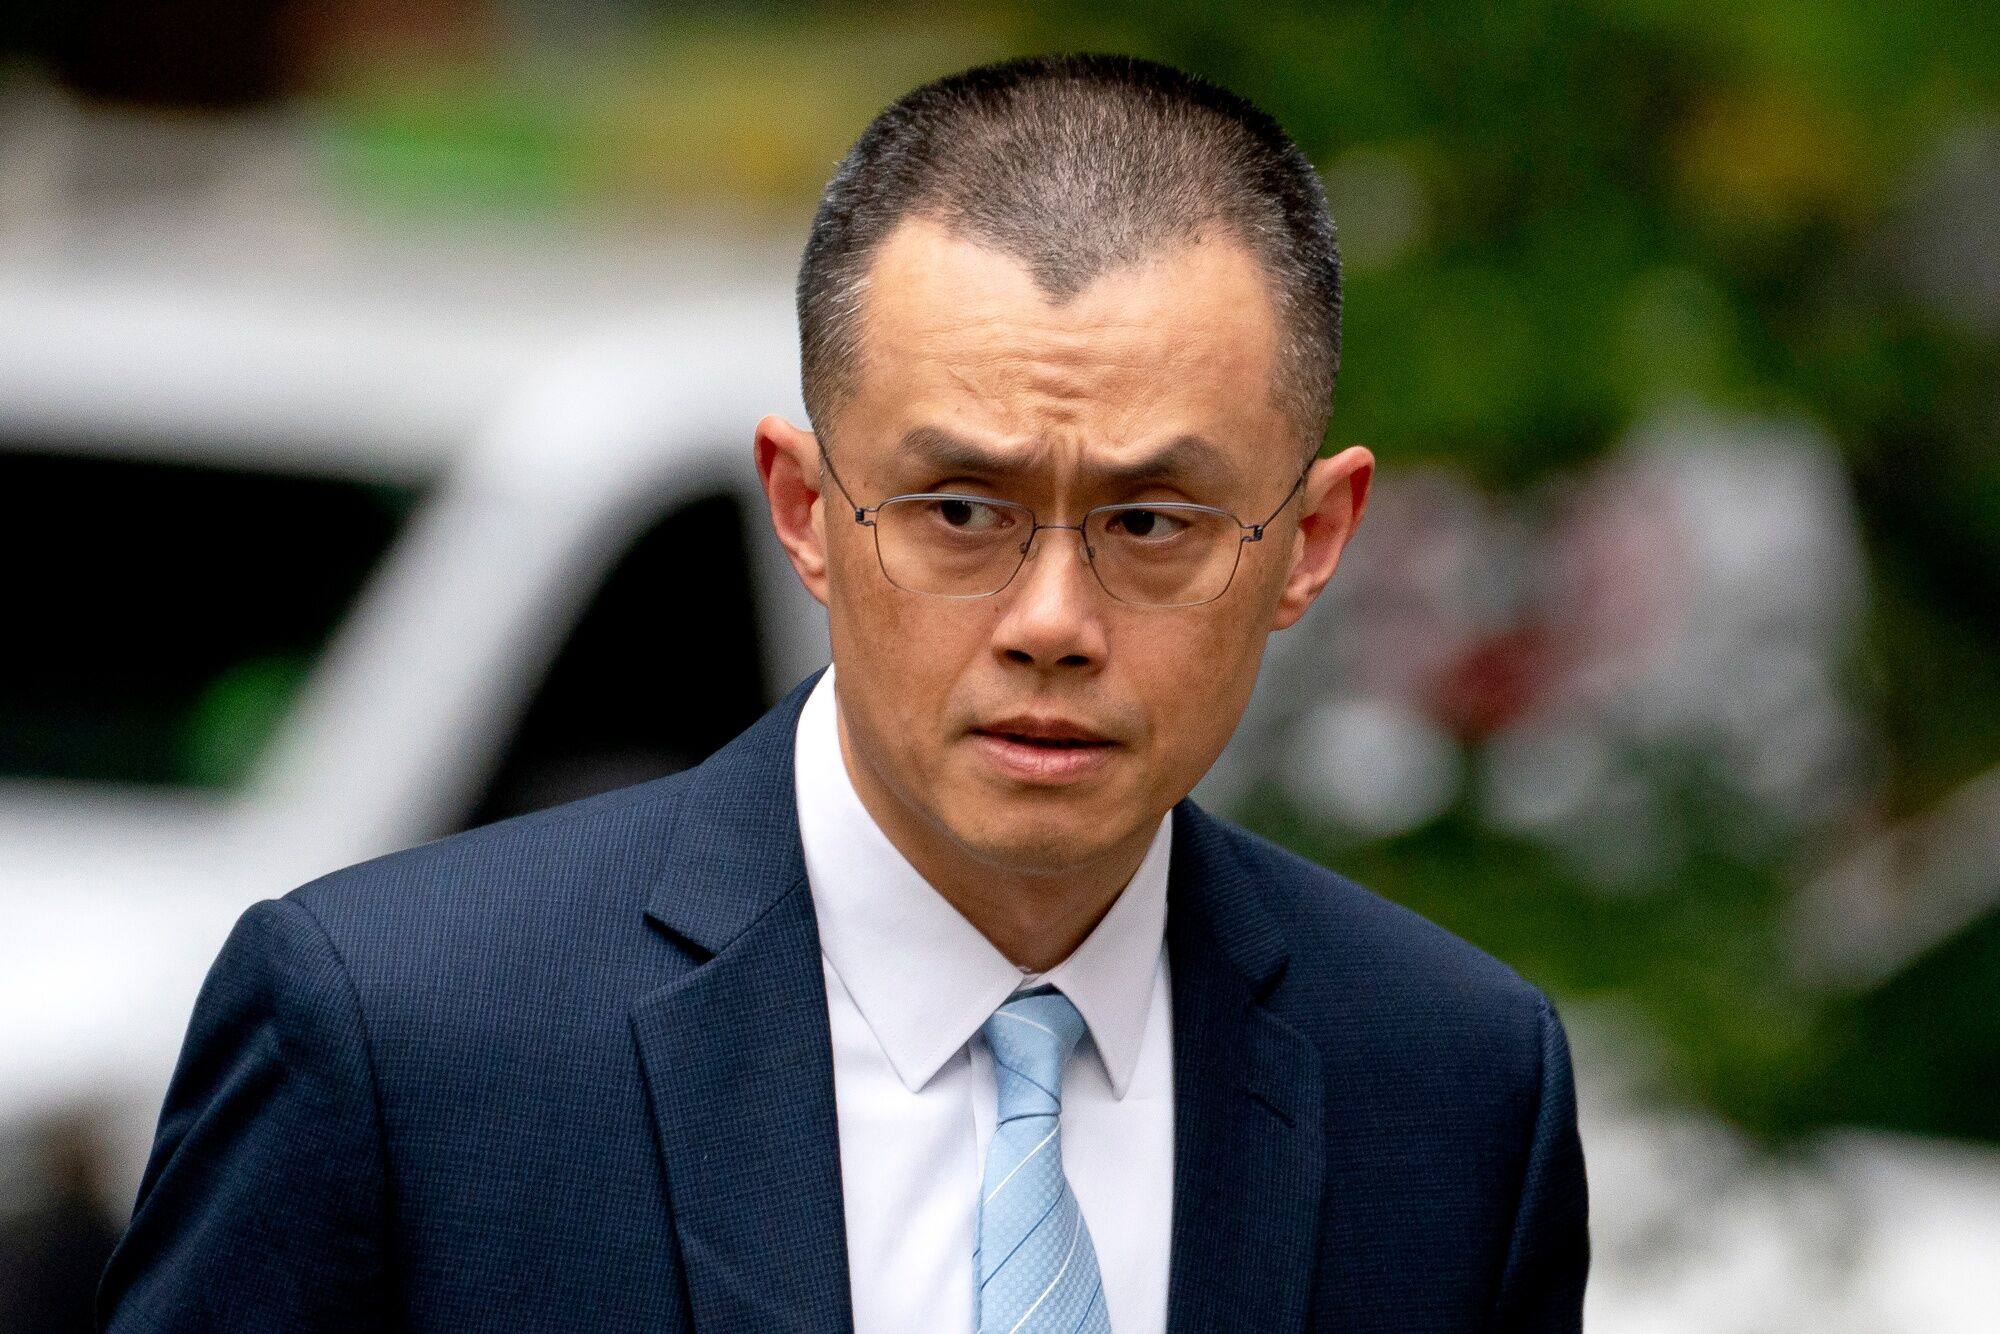 Ex-Binance CEO Changpeng Zhao arrives at federal court in Seattle, Washington, on Tuesday. Photo: Bloomberg